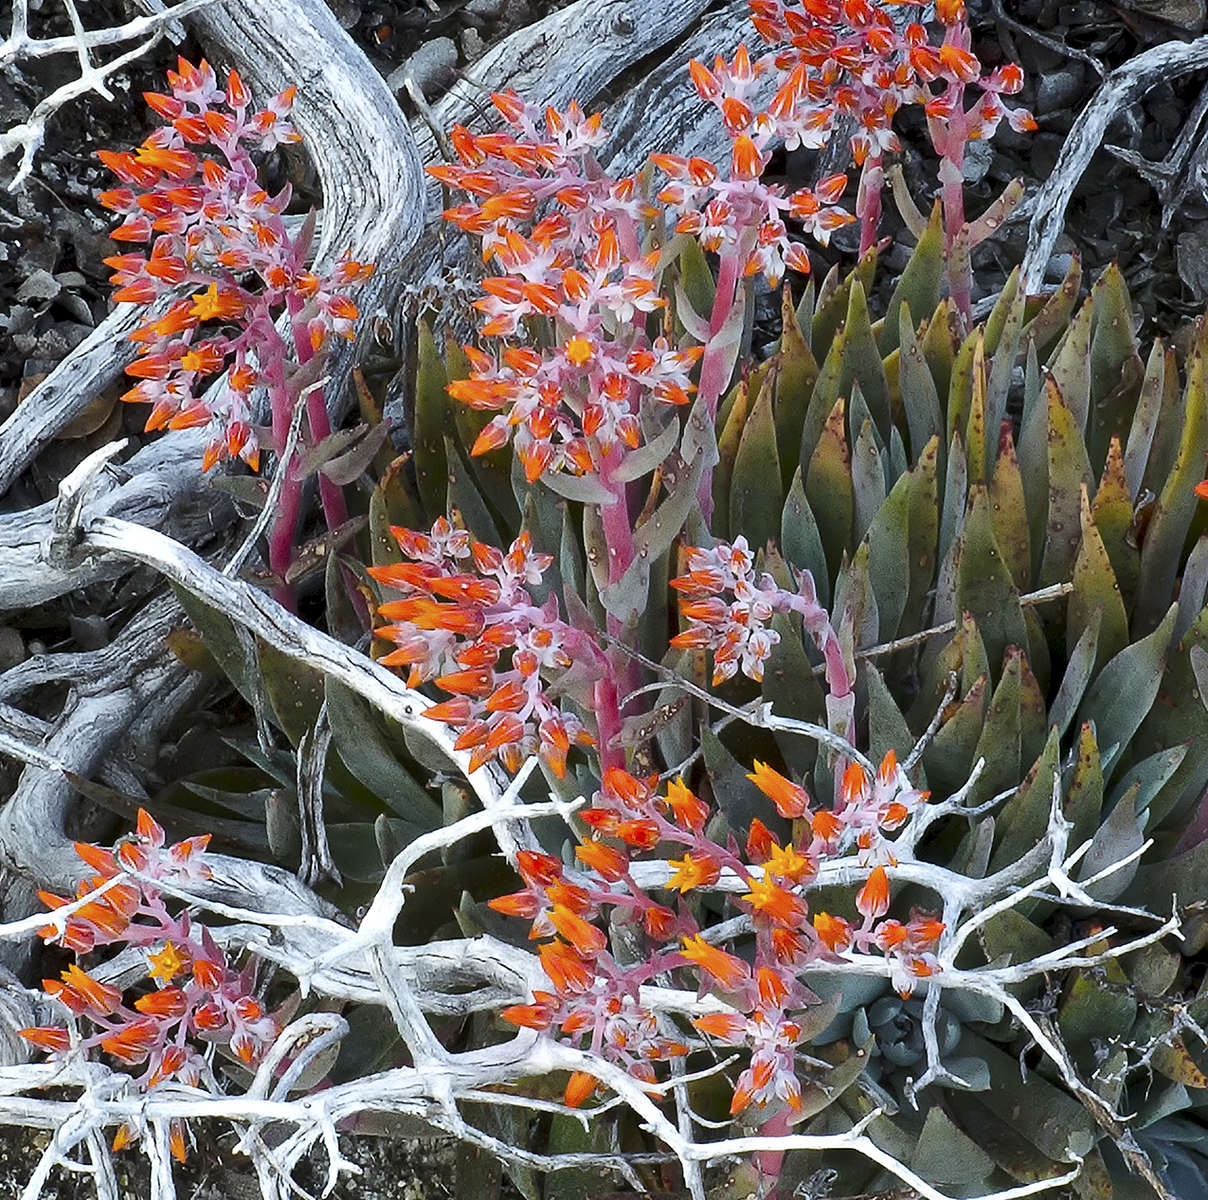 Roeser---Ice-Plant-in-Bloom--at-Shaver-Lake-for-Spectrum-Gallery